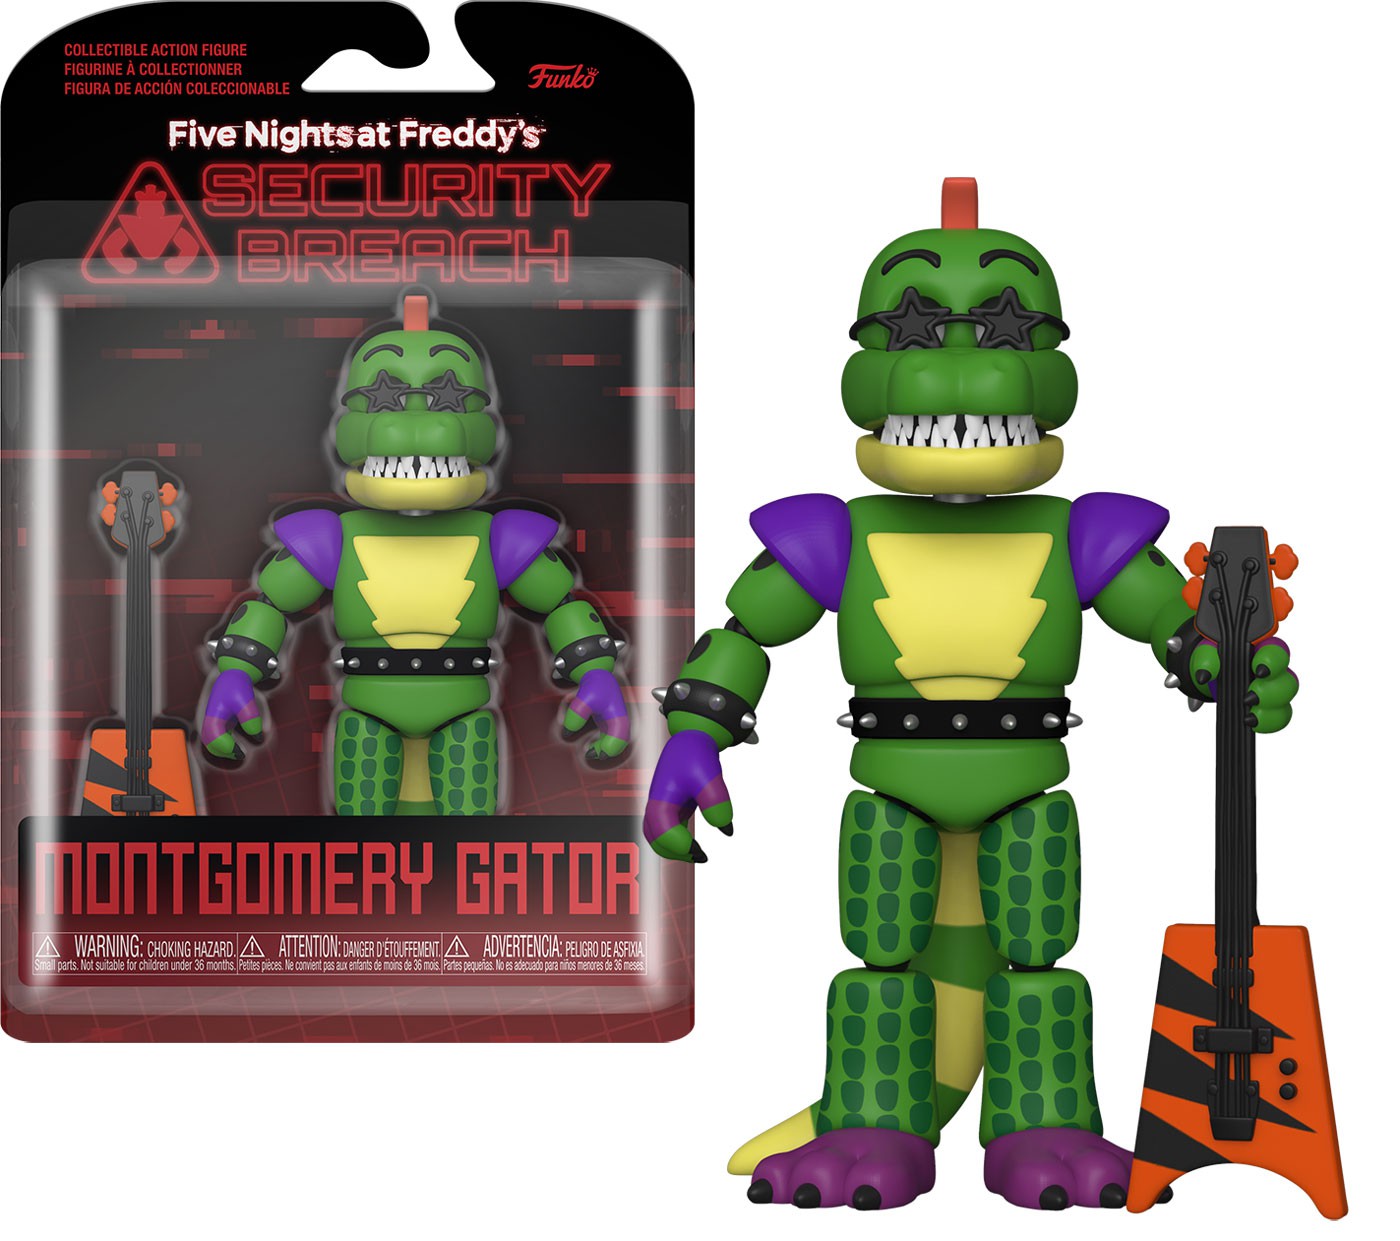 Five Nights at Freddy's: Security Breach - Montgomery Gator